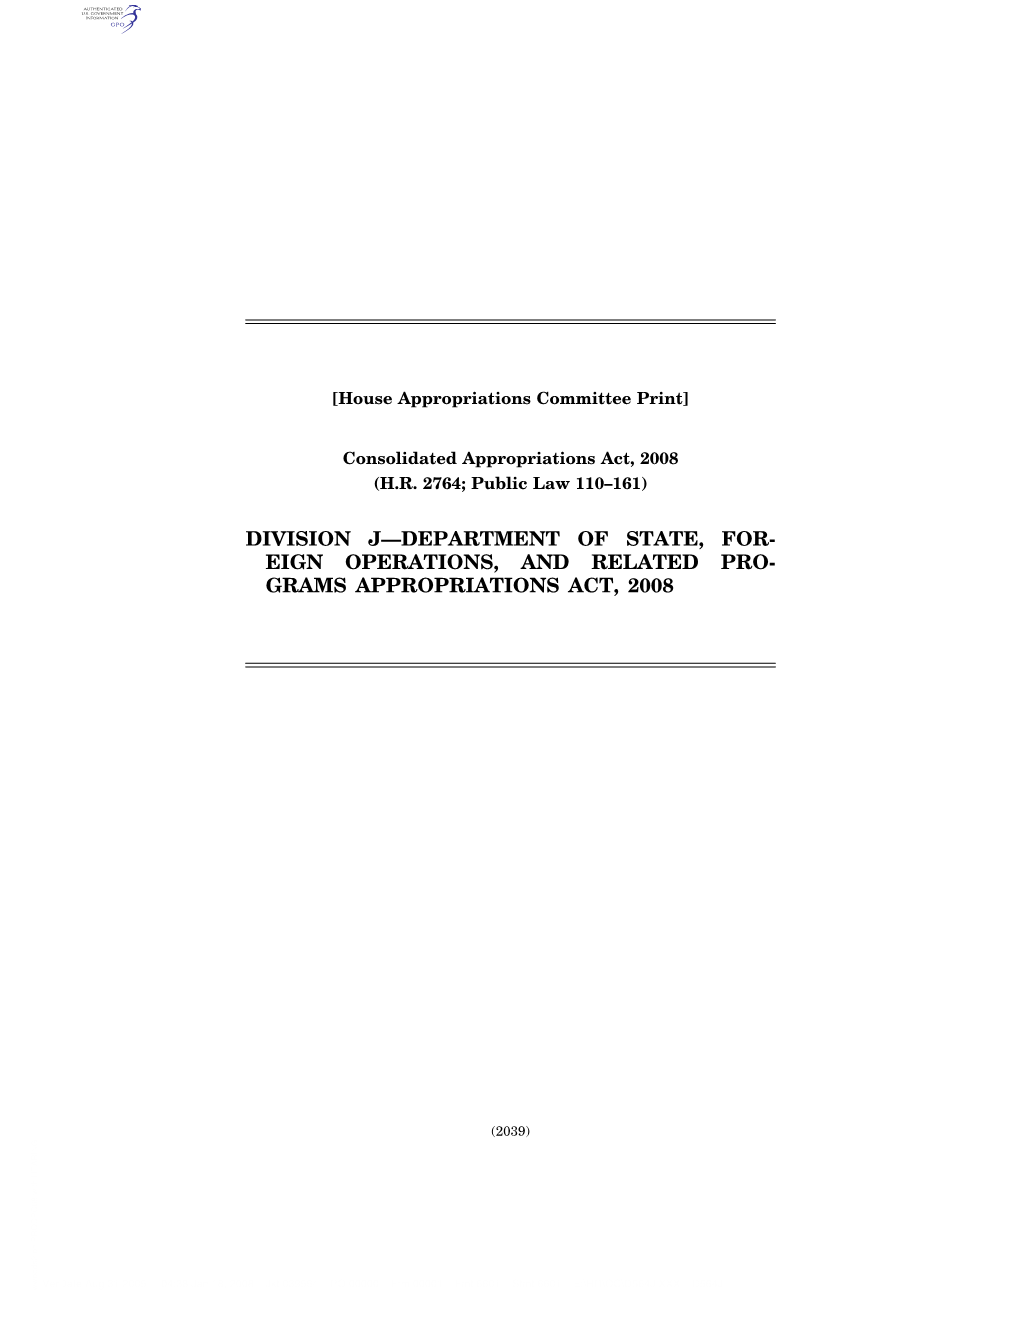 Division J—Department of State, For- Eign Operations, and Related Pro- Grams Appropriations Act, 2008